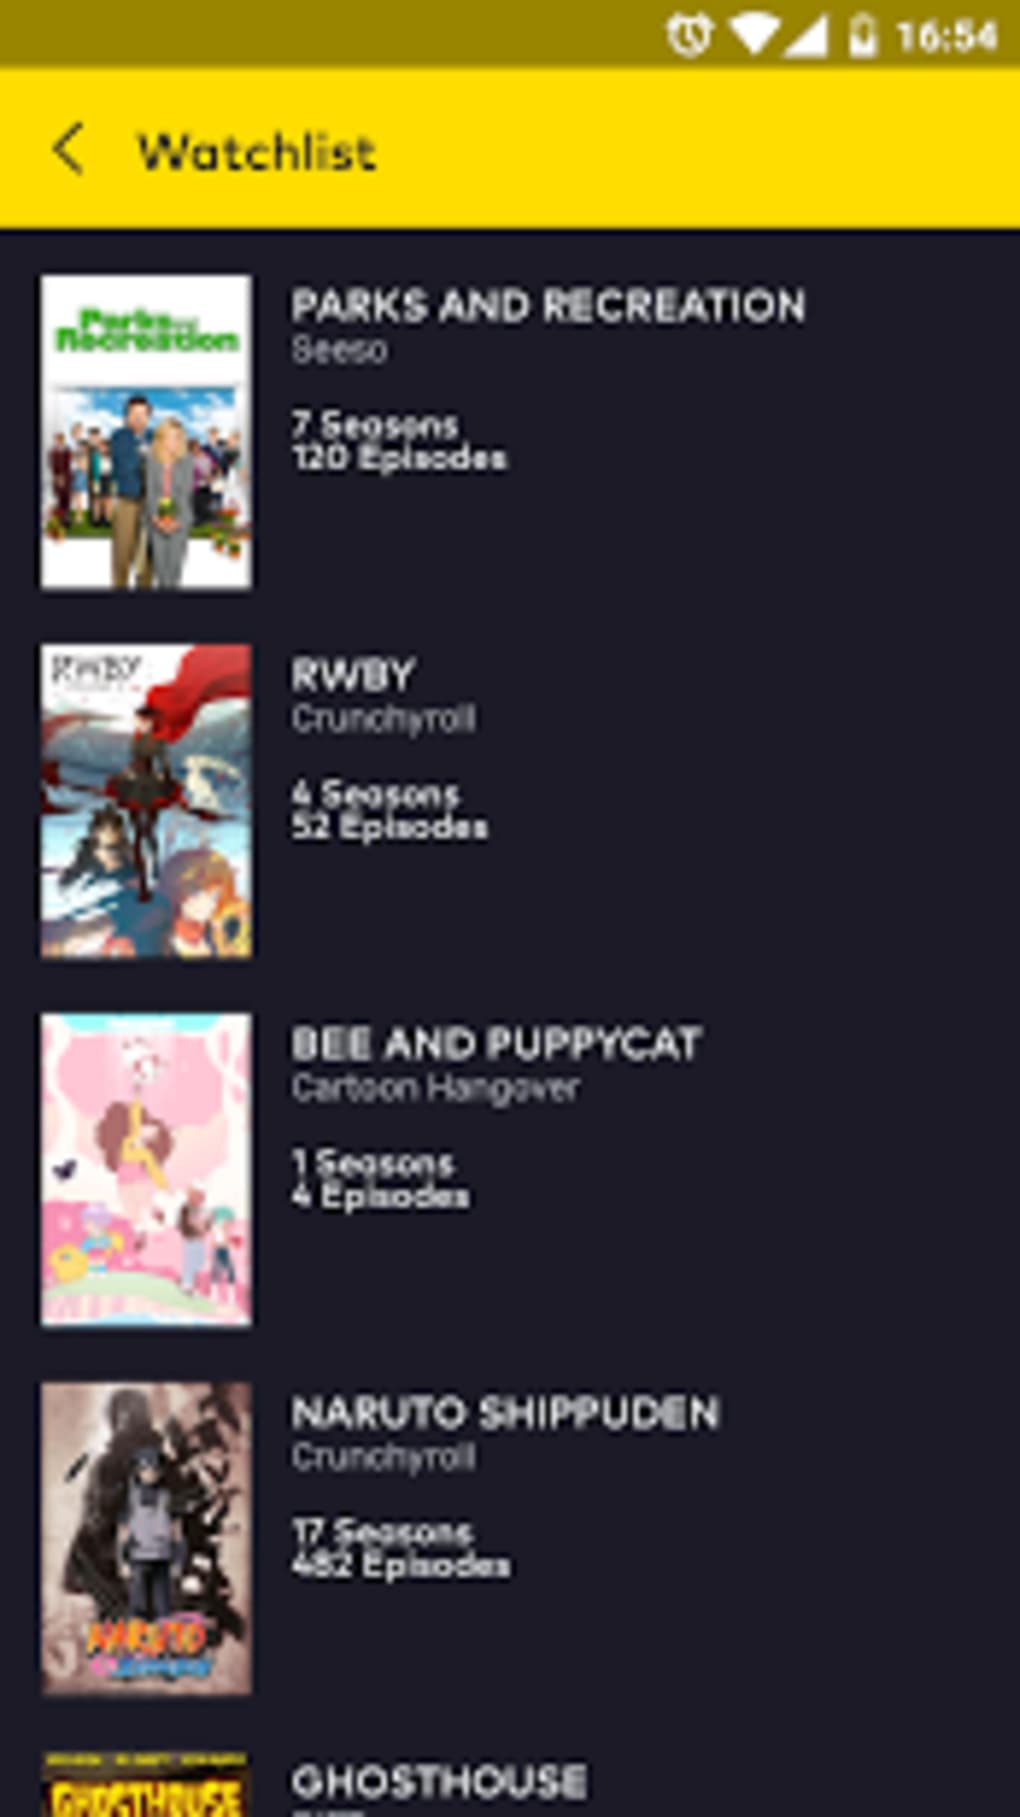 The Best Anime Streaming Services in 2021